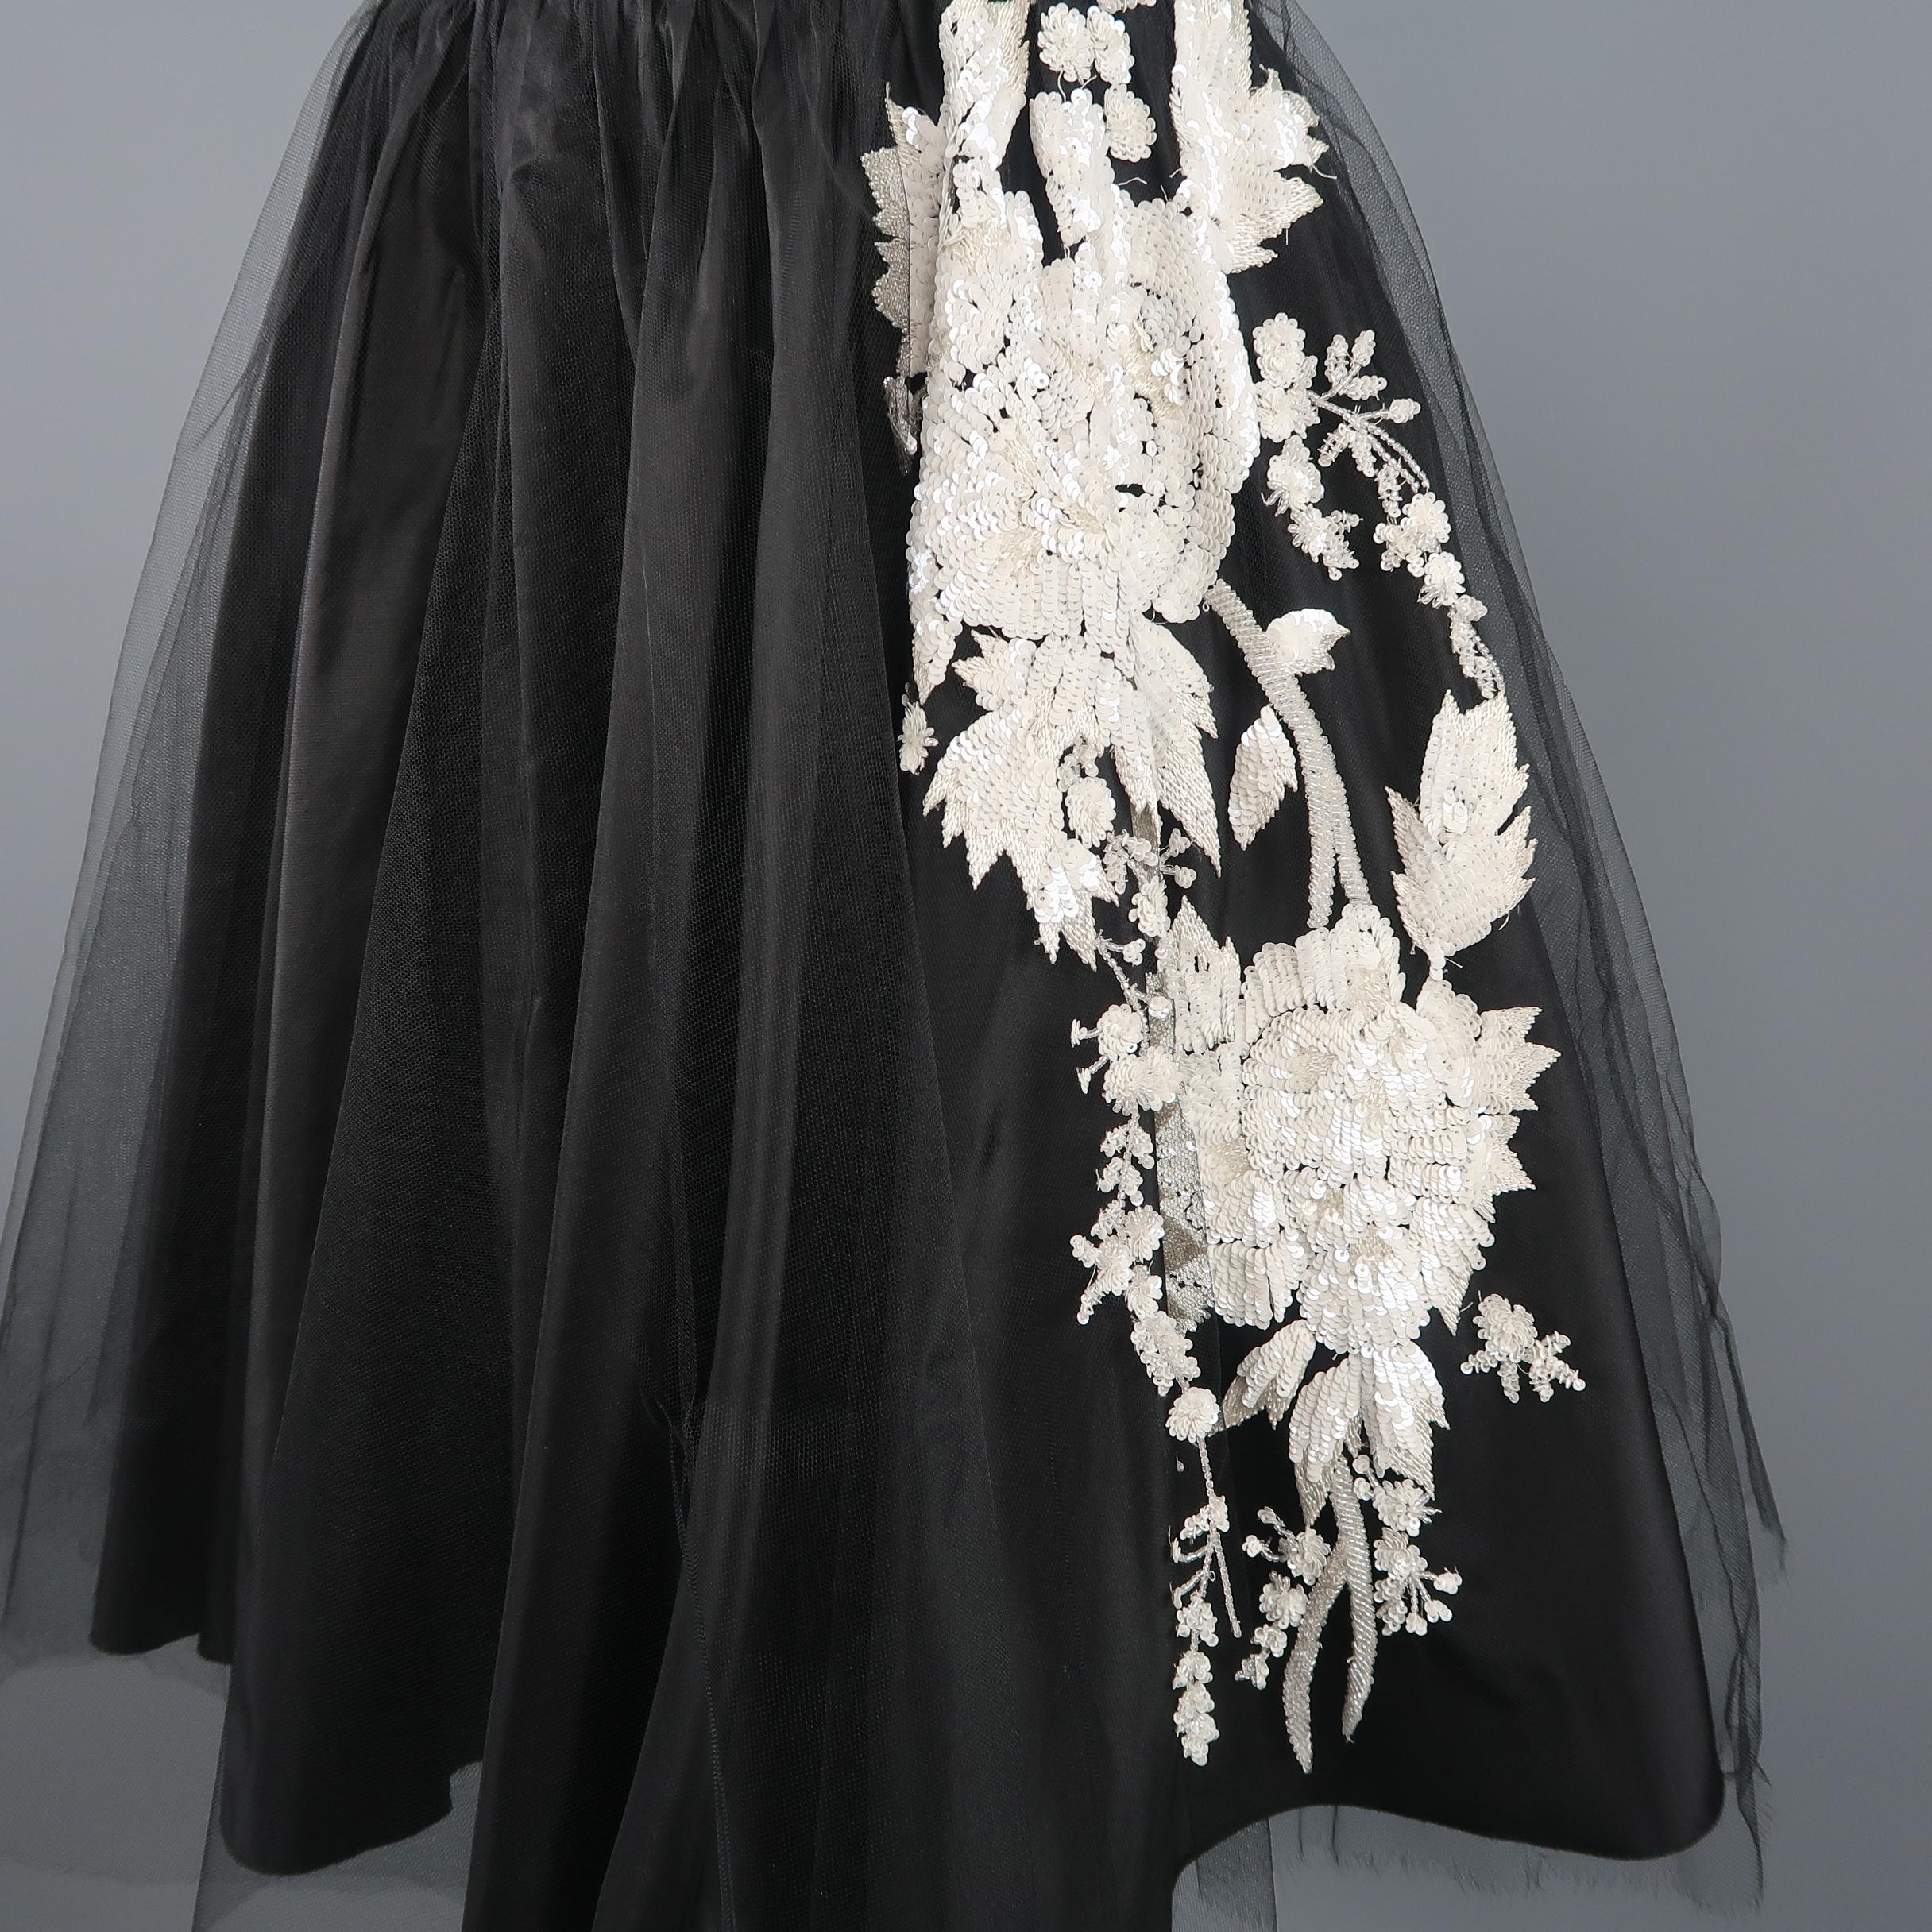 VALENTINO A line skirt comes in black taffeta with a tulle overlay detailed with white sequin floral applique. Made in Italy.
 
Excellent Pre-Owned Condition.
Marked: 4
 
Measurements:
 
Waist: 30 in.
Hip: 60 in.
Length: 22 in.